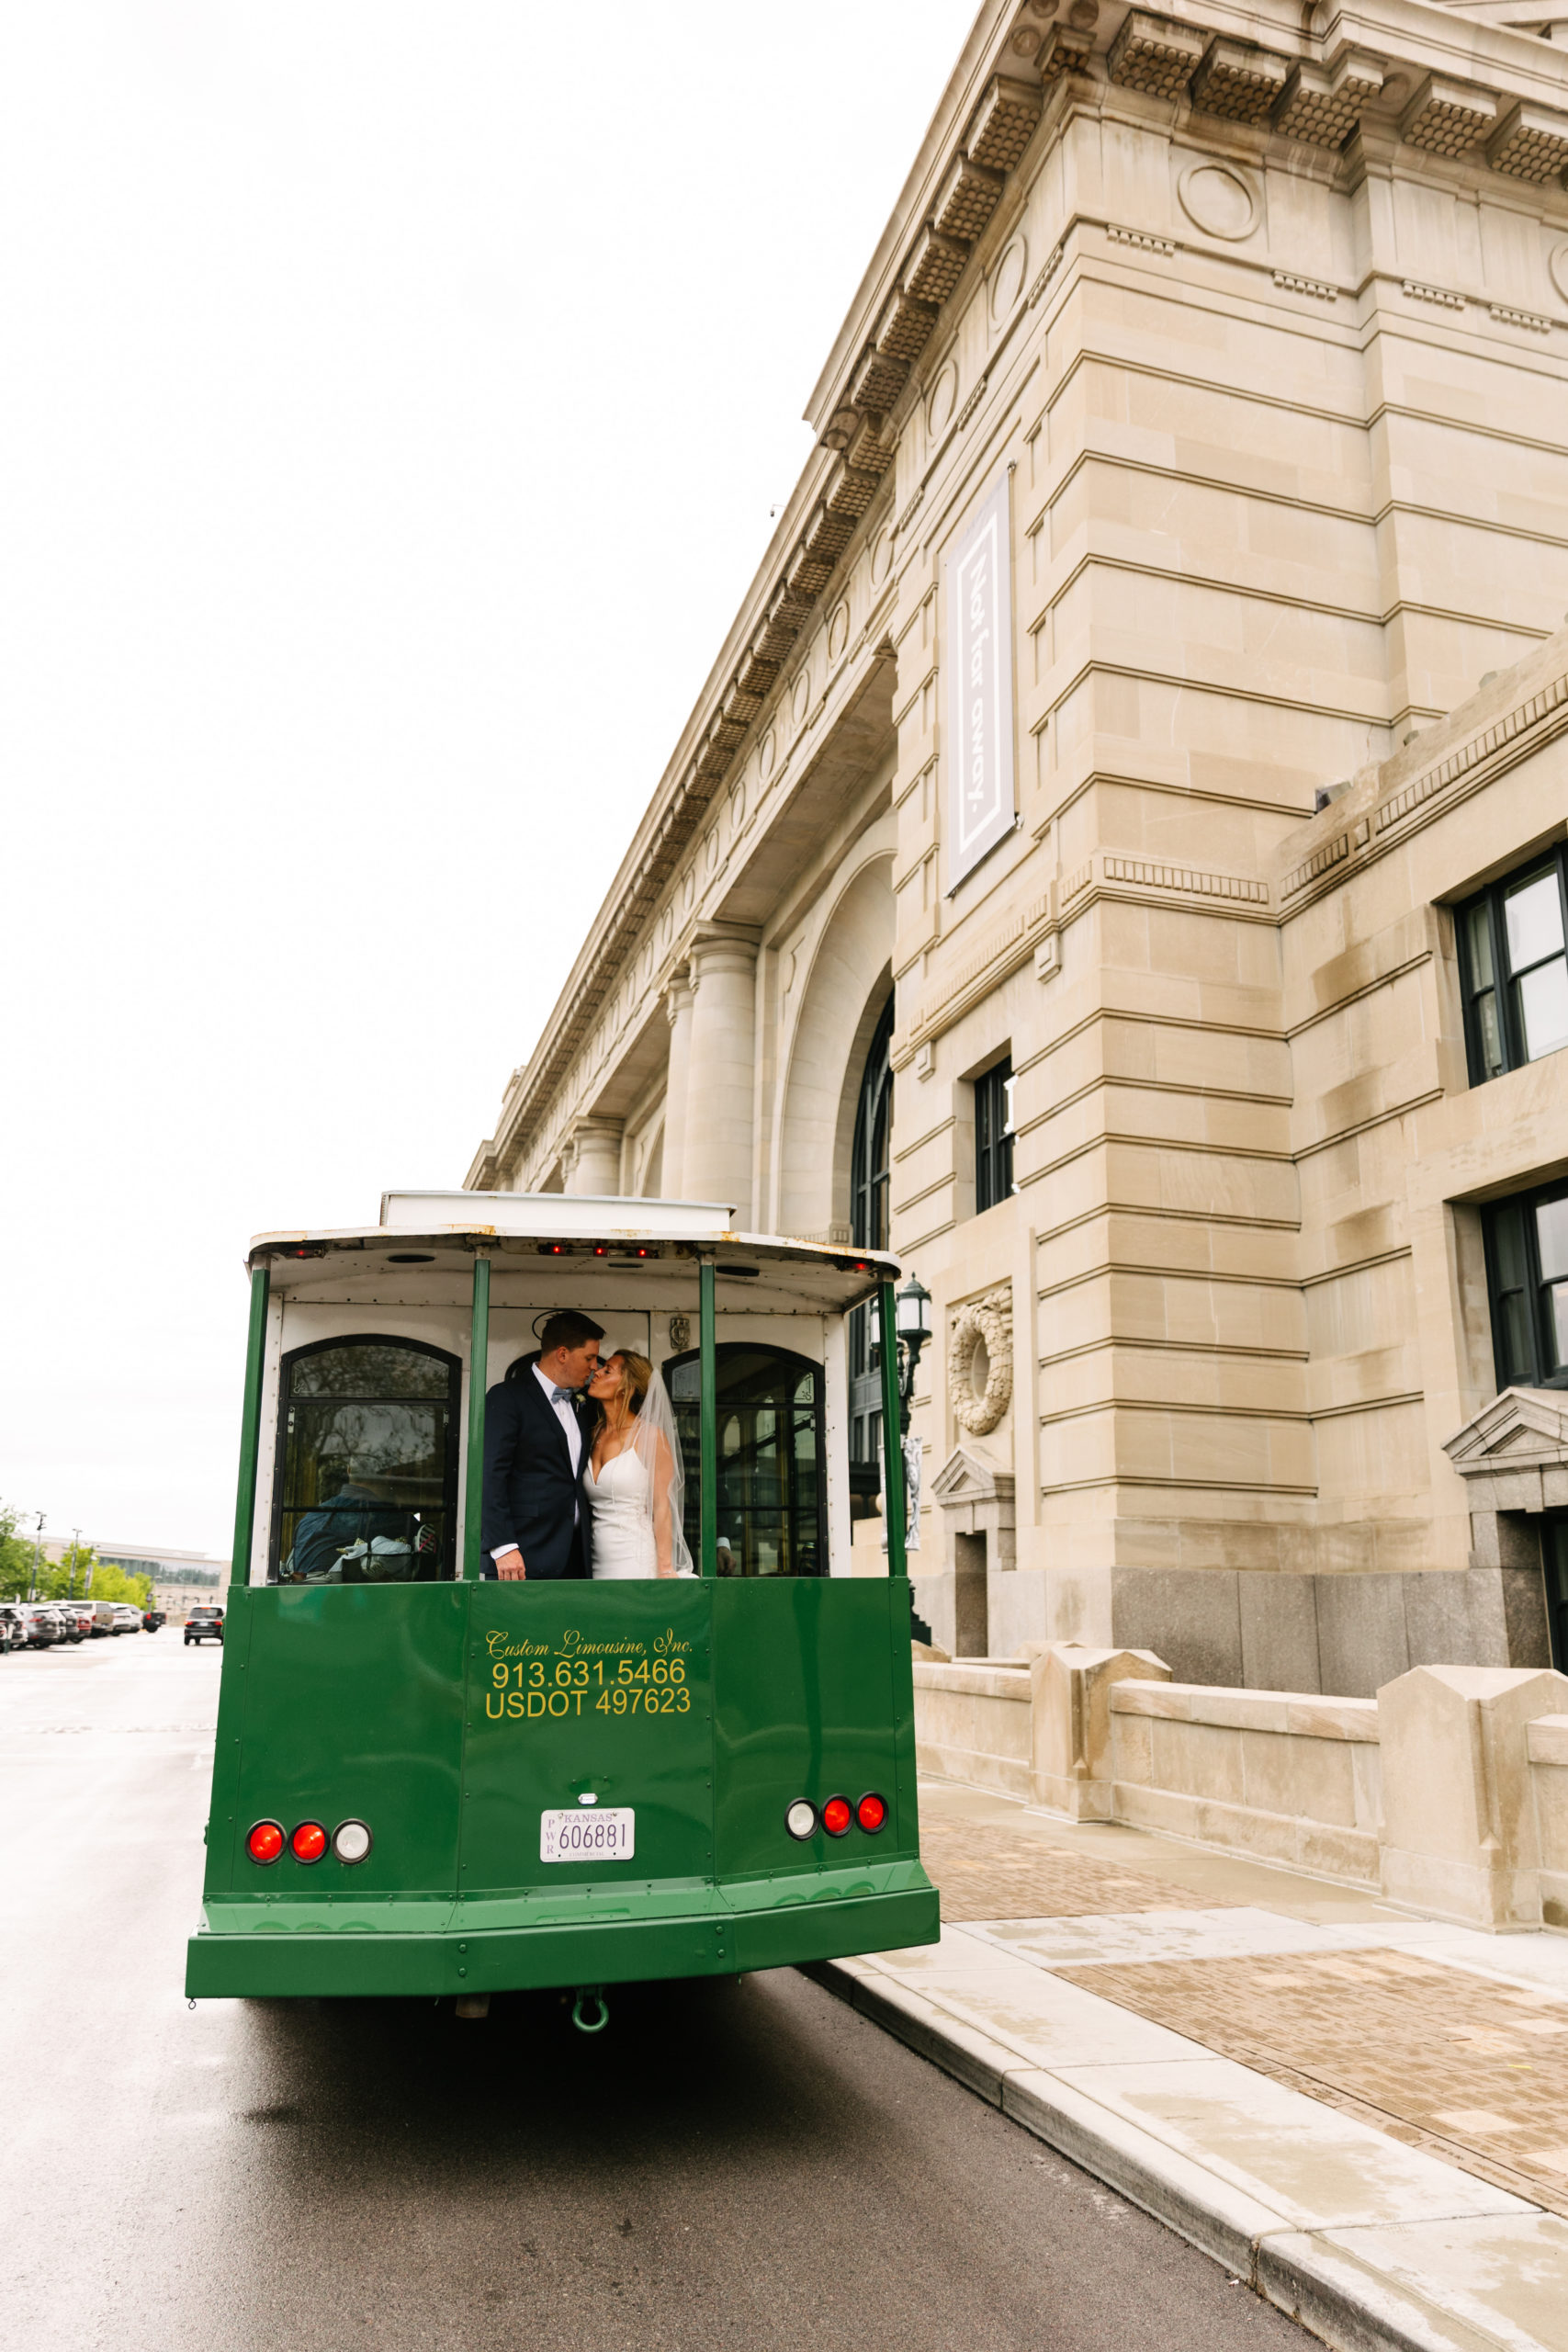 couple uses trolley as wedding day transportation in downtown kansas city, kansas city wedding photographer gives tips on coordinating multiple locations on a wedding day